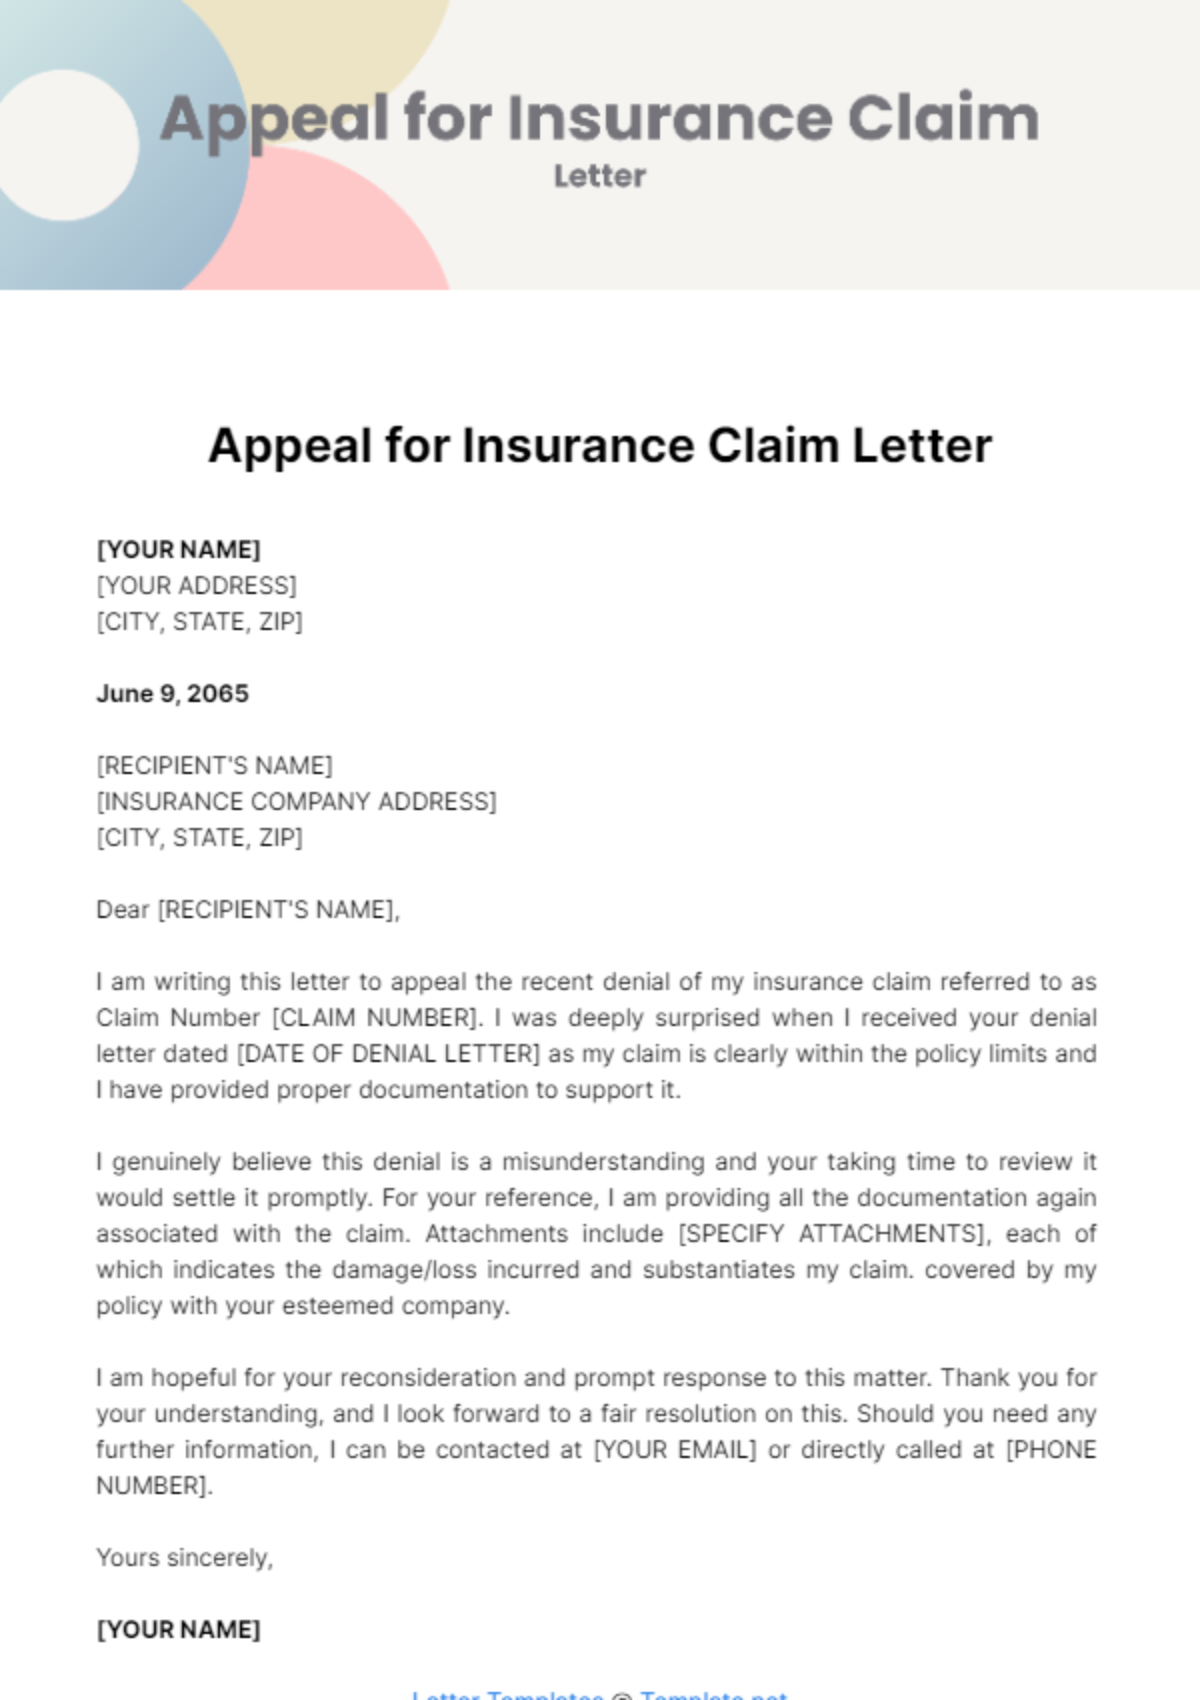 Free Appeal for Insurance Claim Letter Template